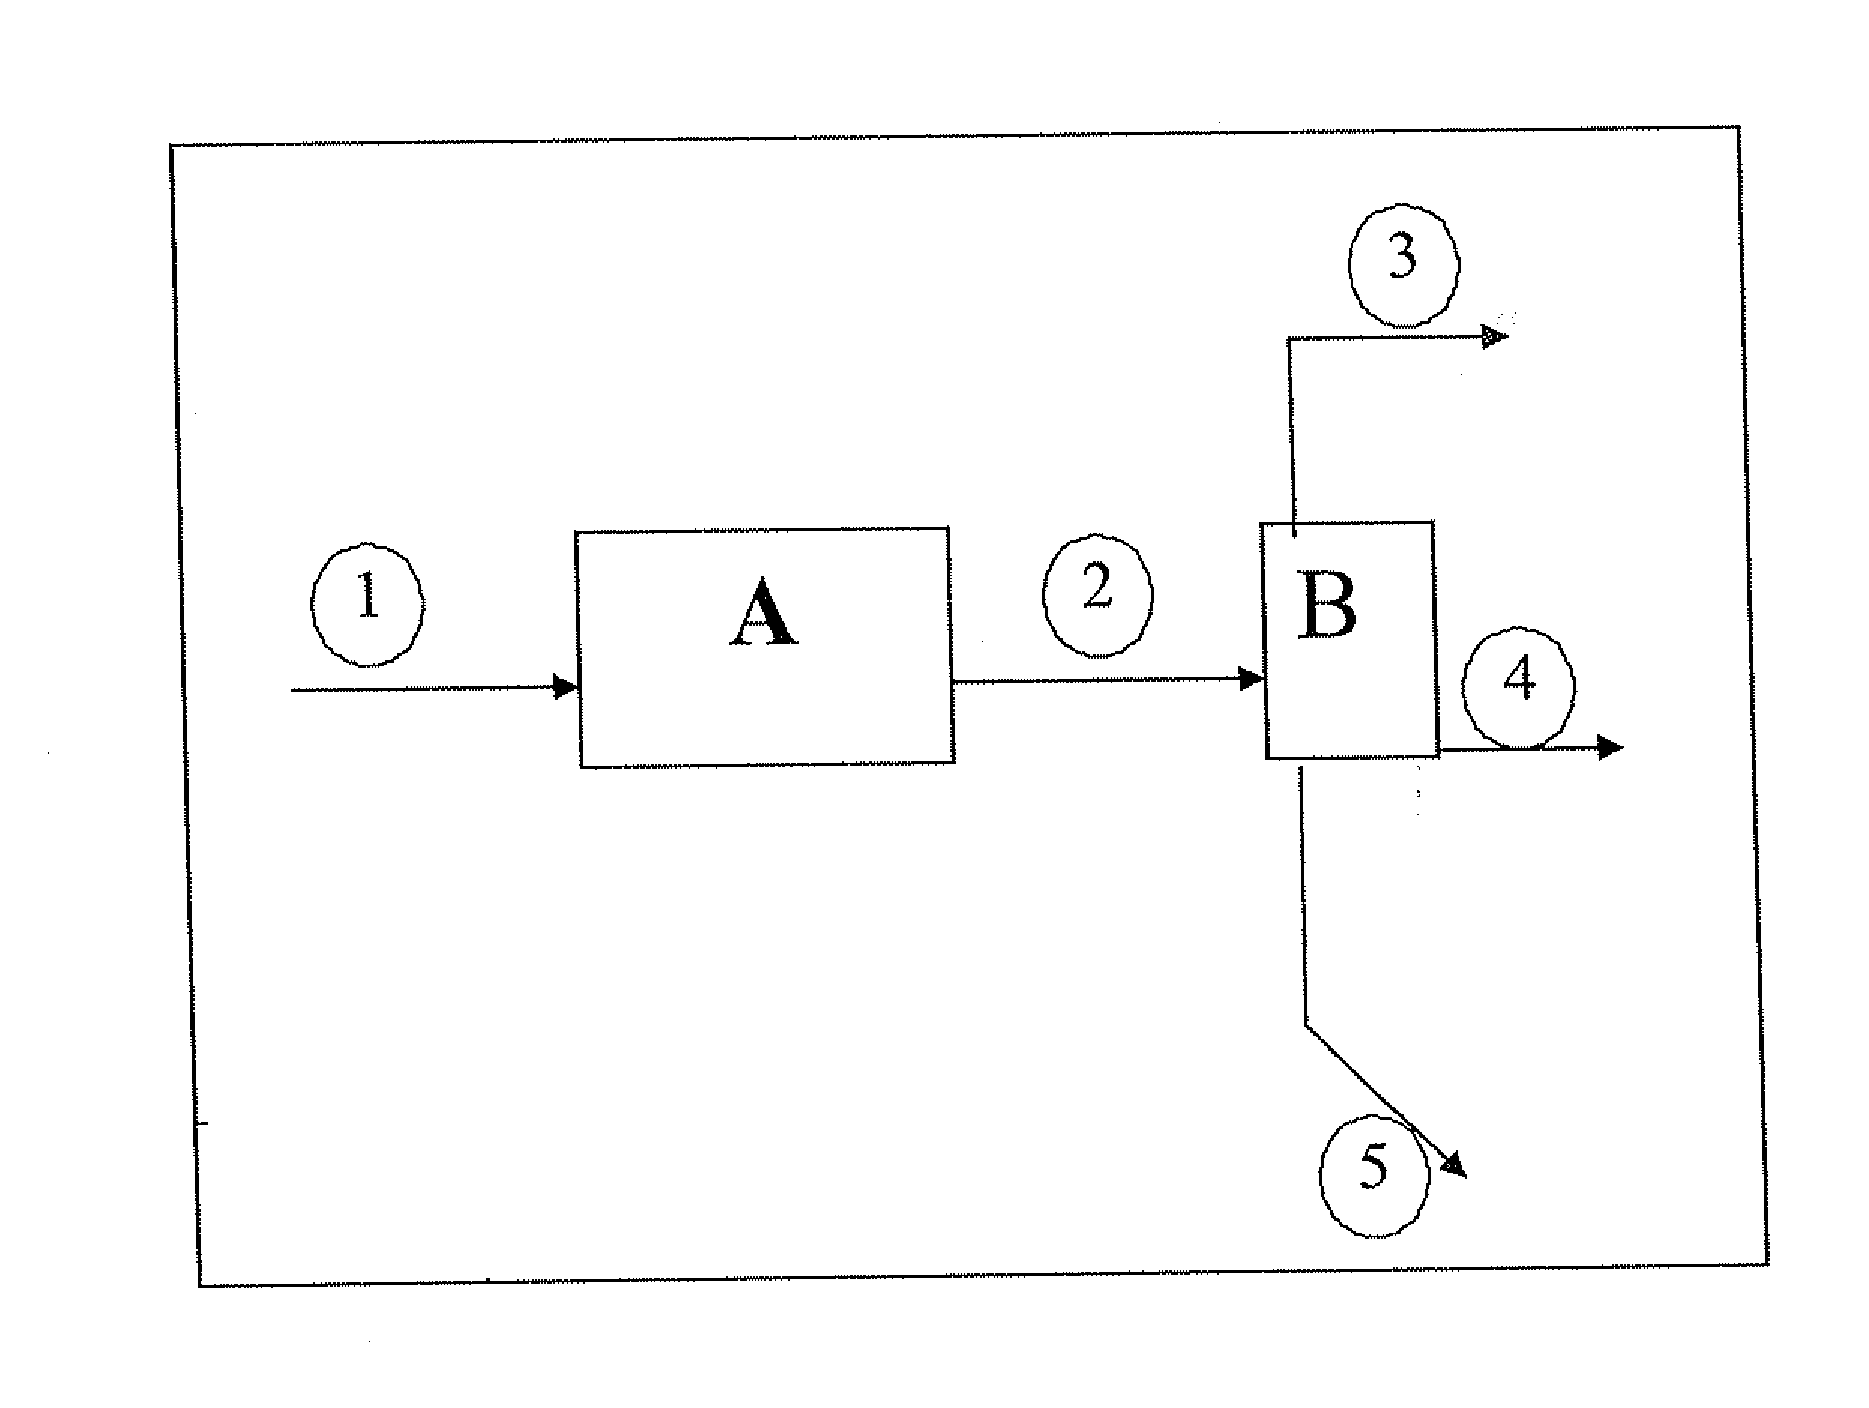 Method of converting ethanol to base stock for diesel fuel